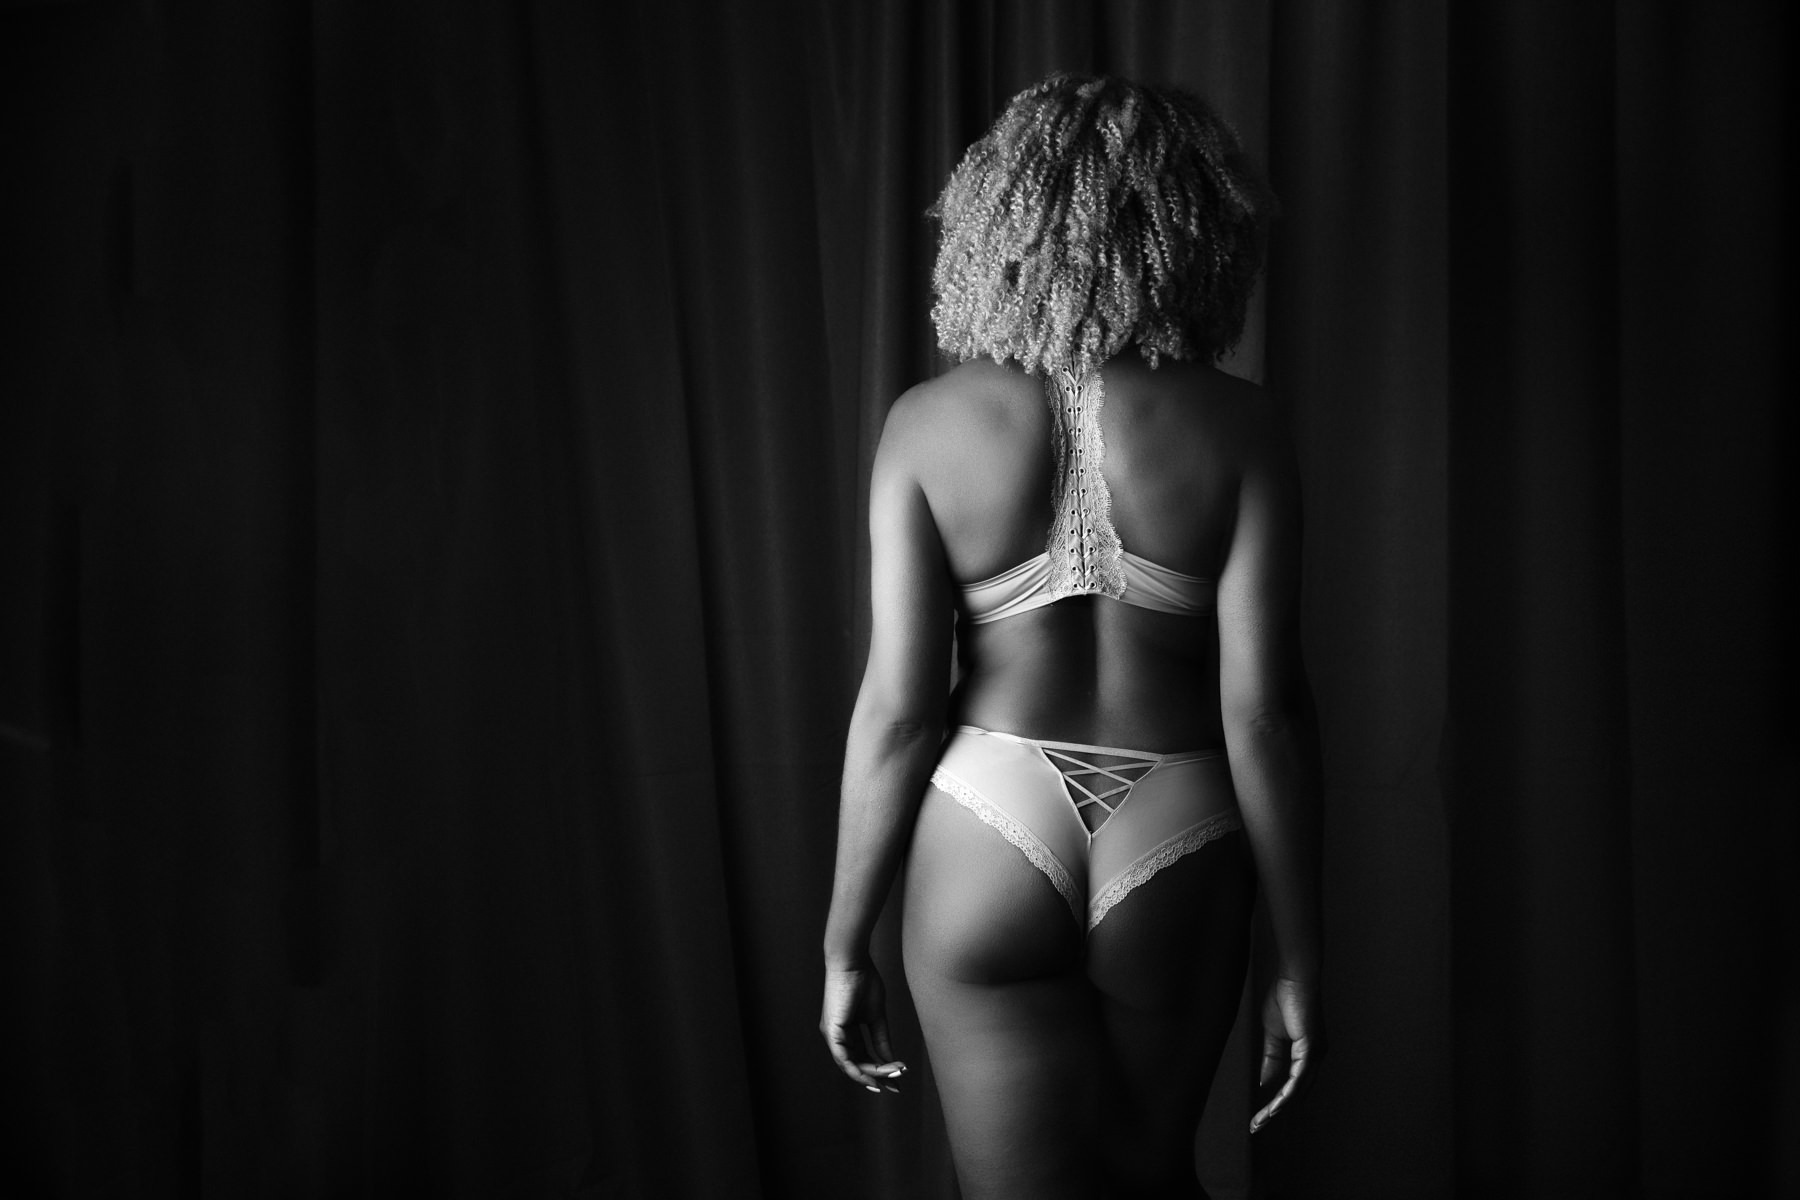 Black and white boudoir photograph of an athletically toned black woman wearing lingerie for a boudoir session